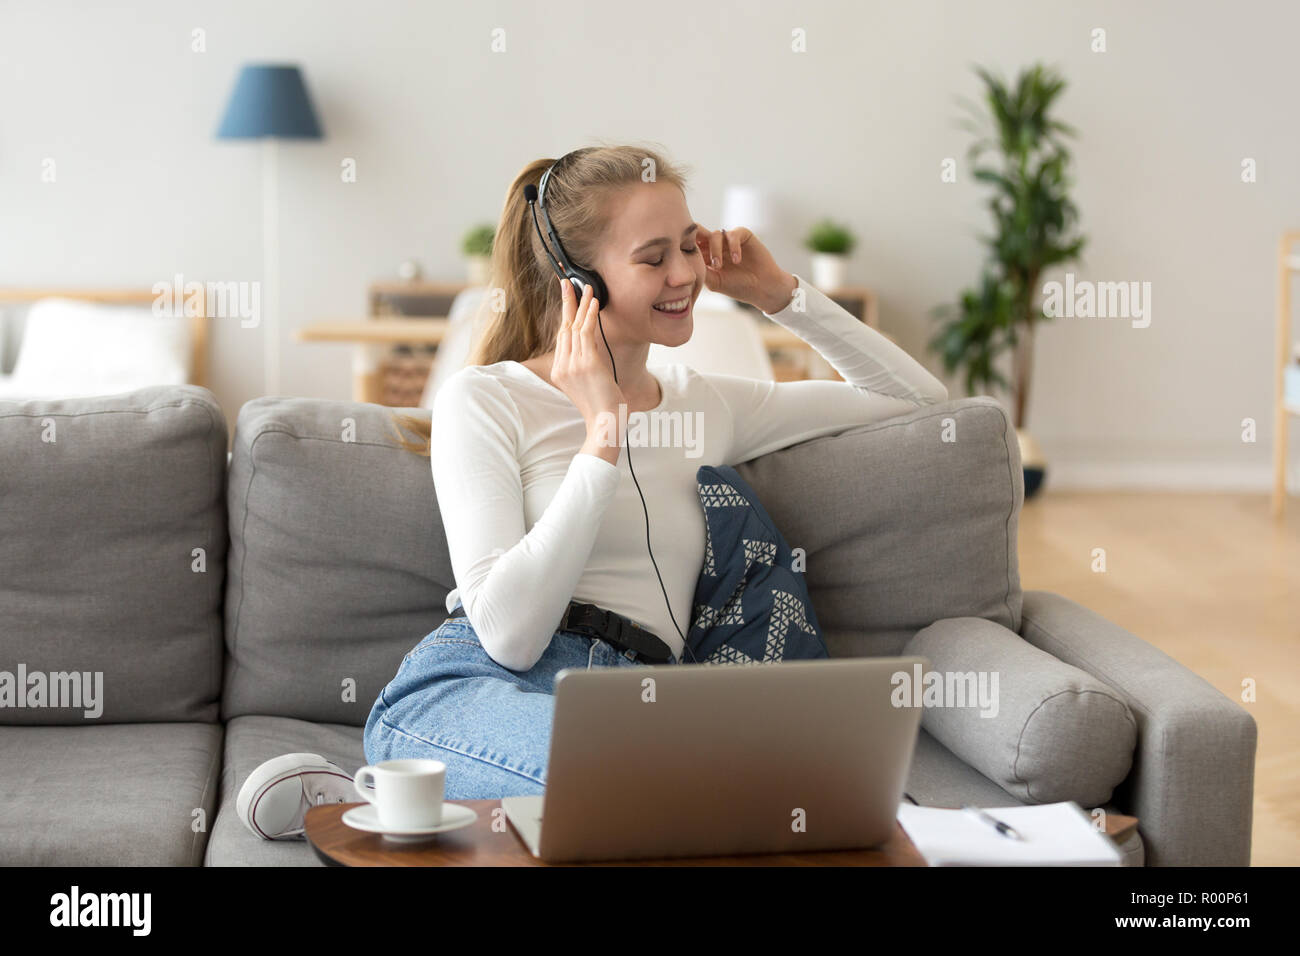 Woman in headset listening music feels good Stock Photo